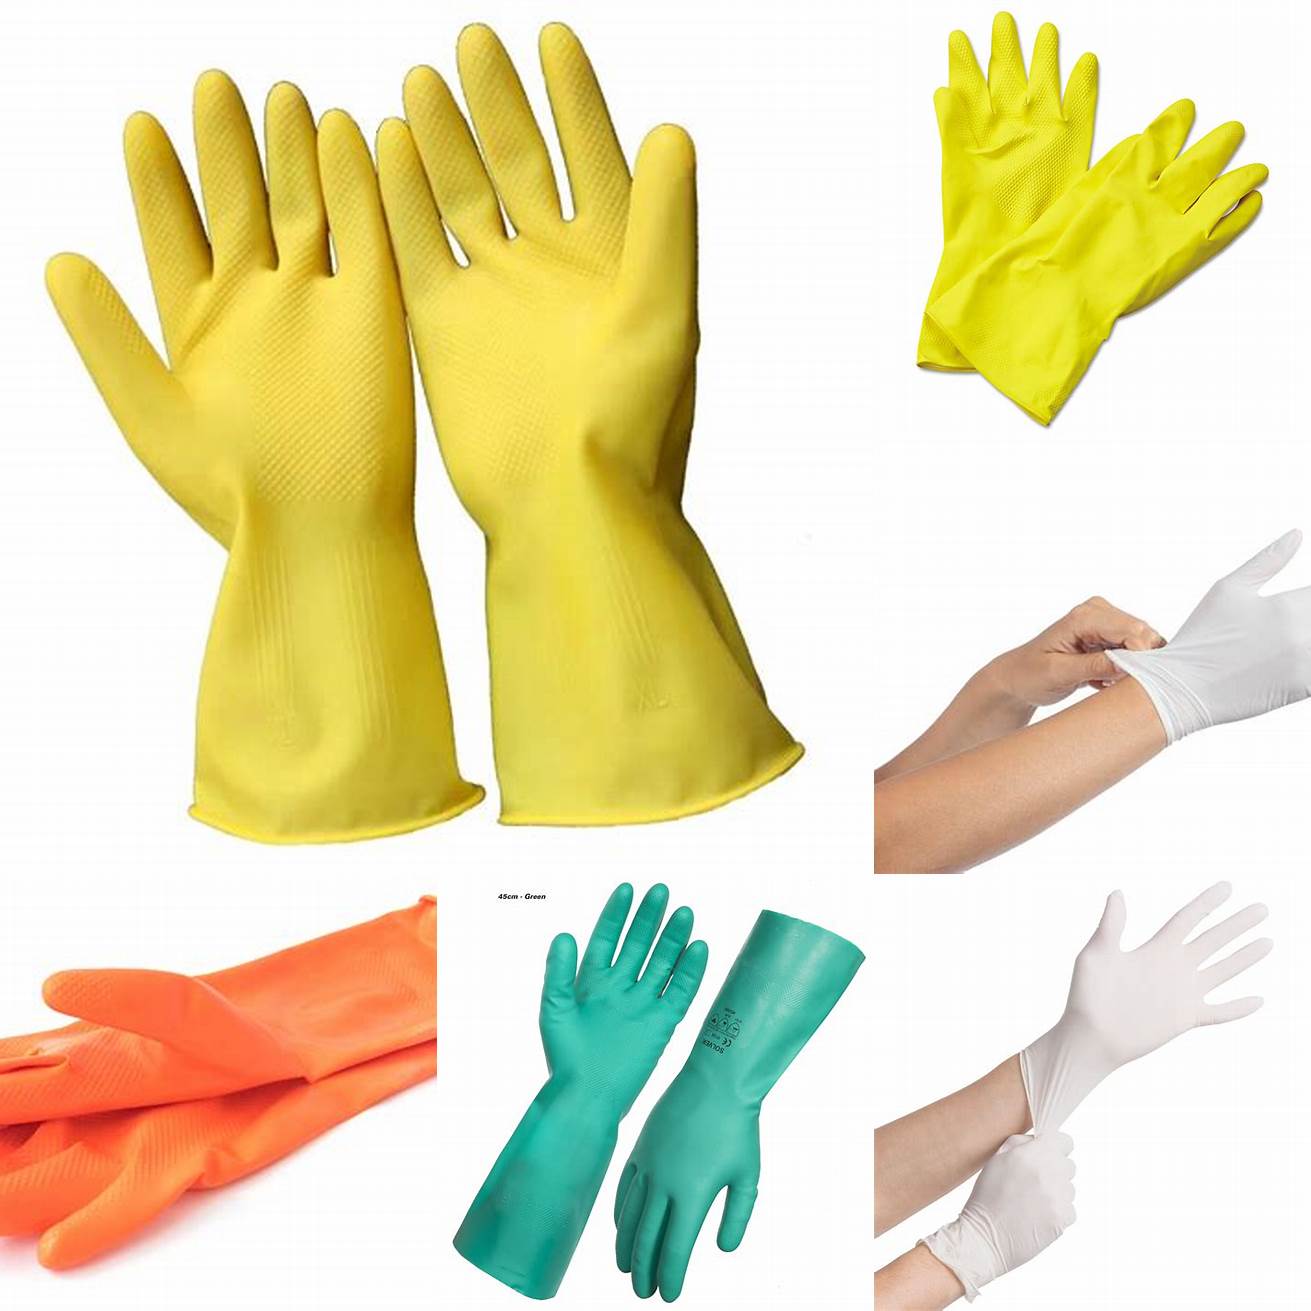 Use rubber gloves